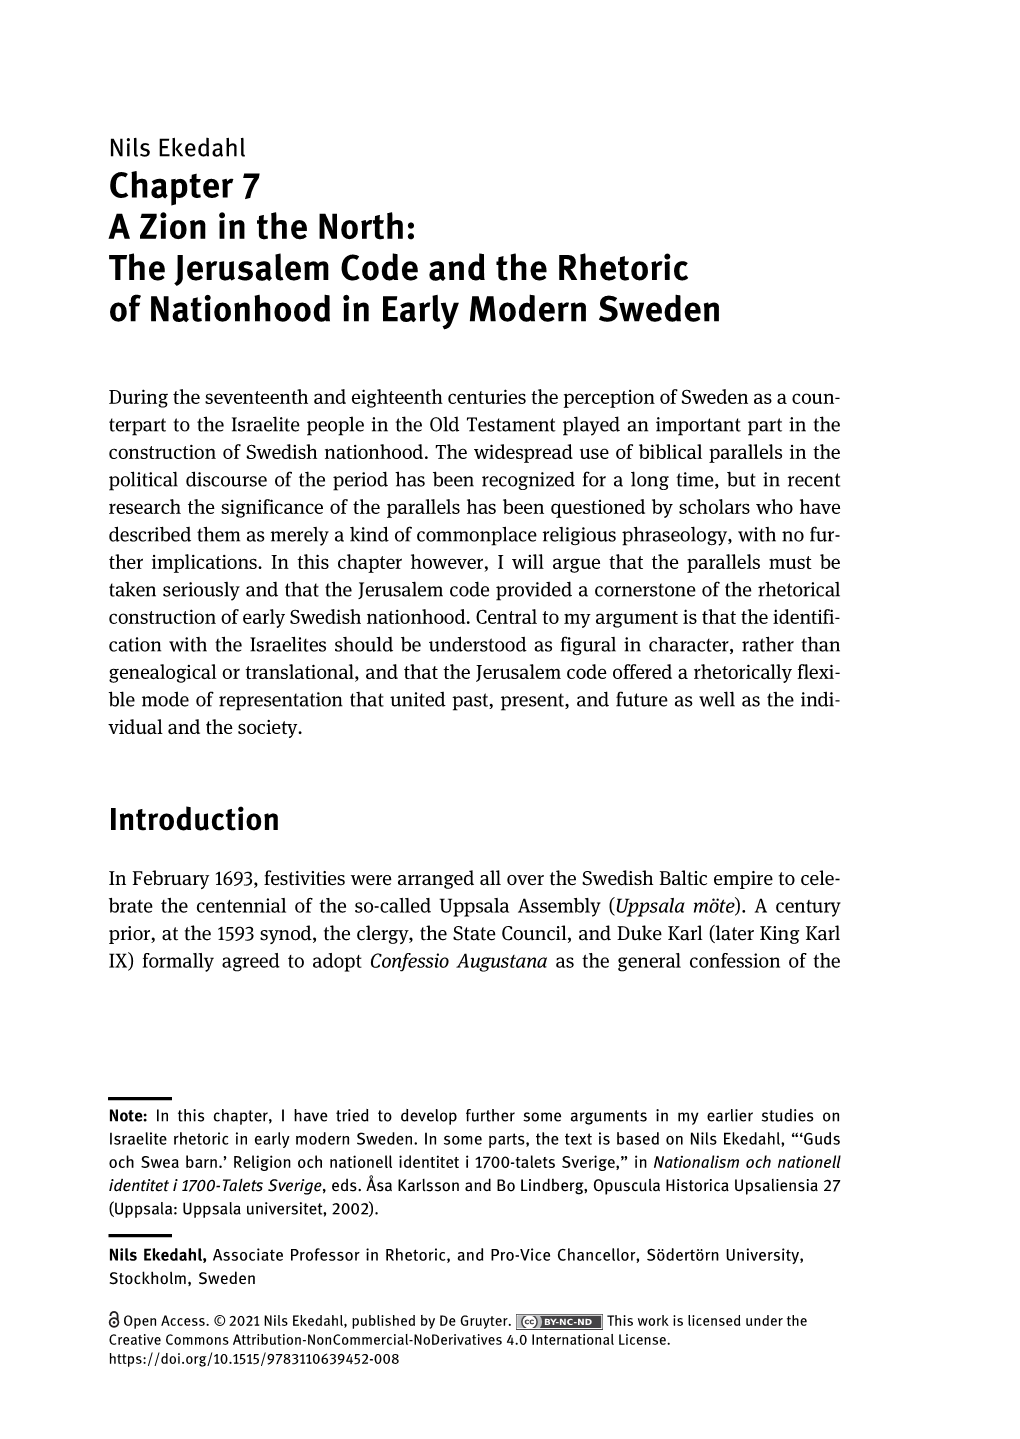 A Zion in the North: the Jerusalem Code and the Rhetoric of Nationhood in Early Modern Sweden